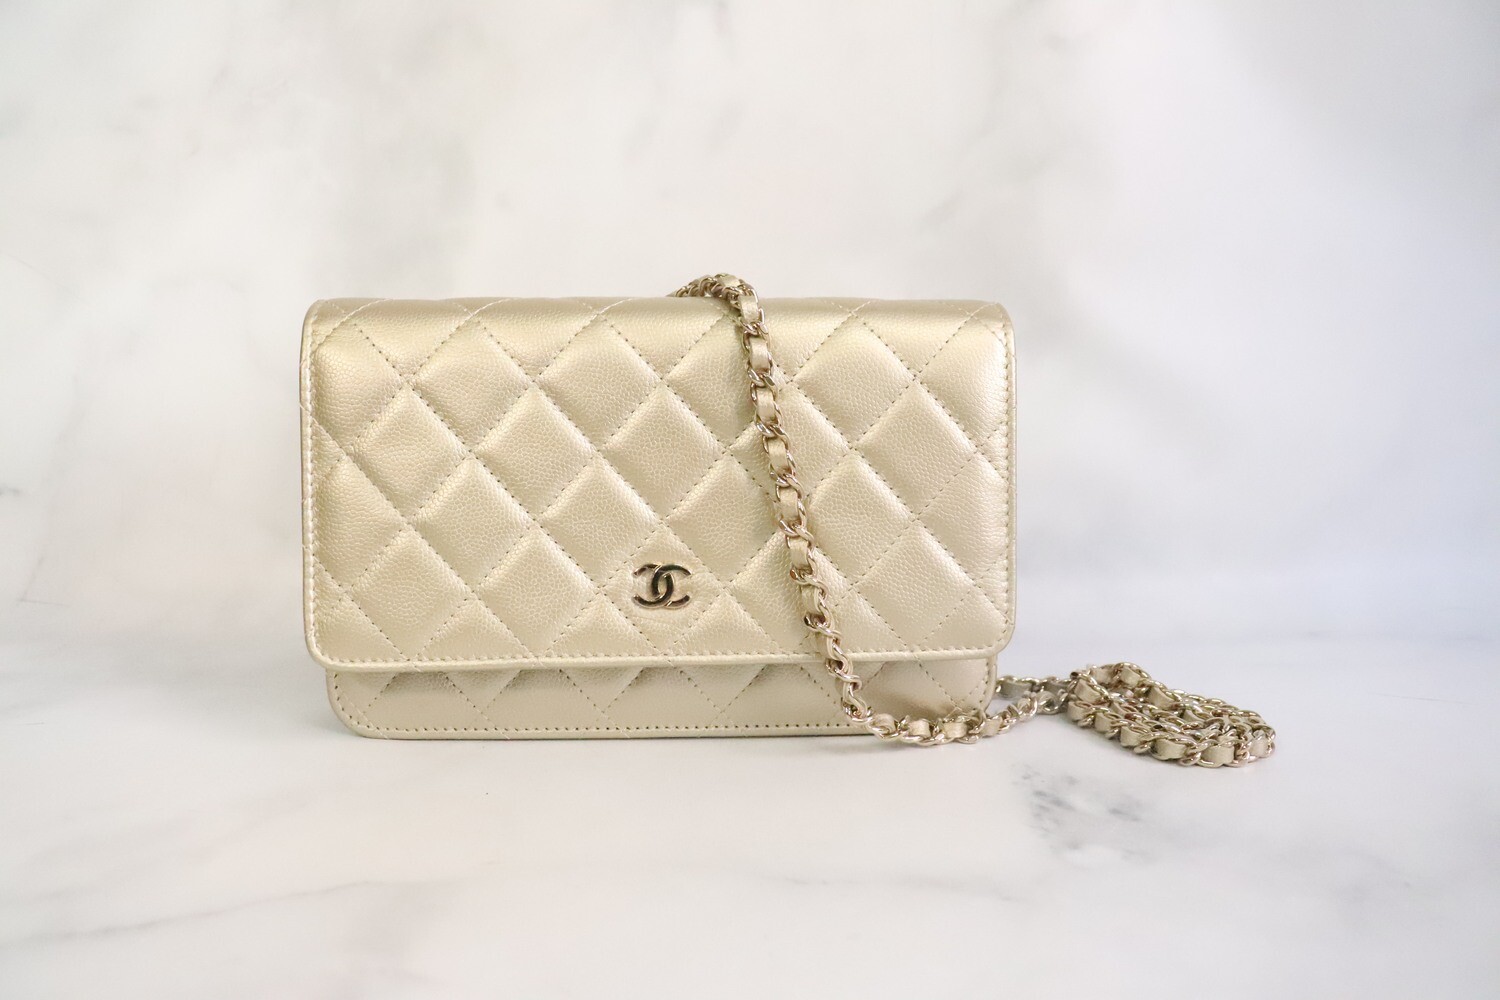 Chanel Wallet on Chain, Light Gold Caviar Leather, Gold Hardware, New in Box